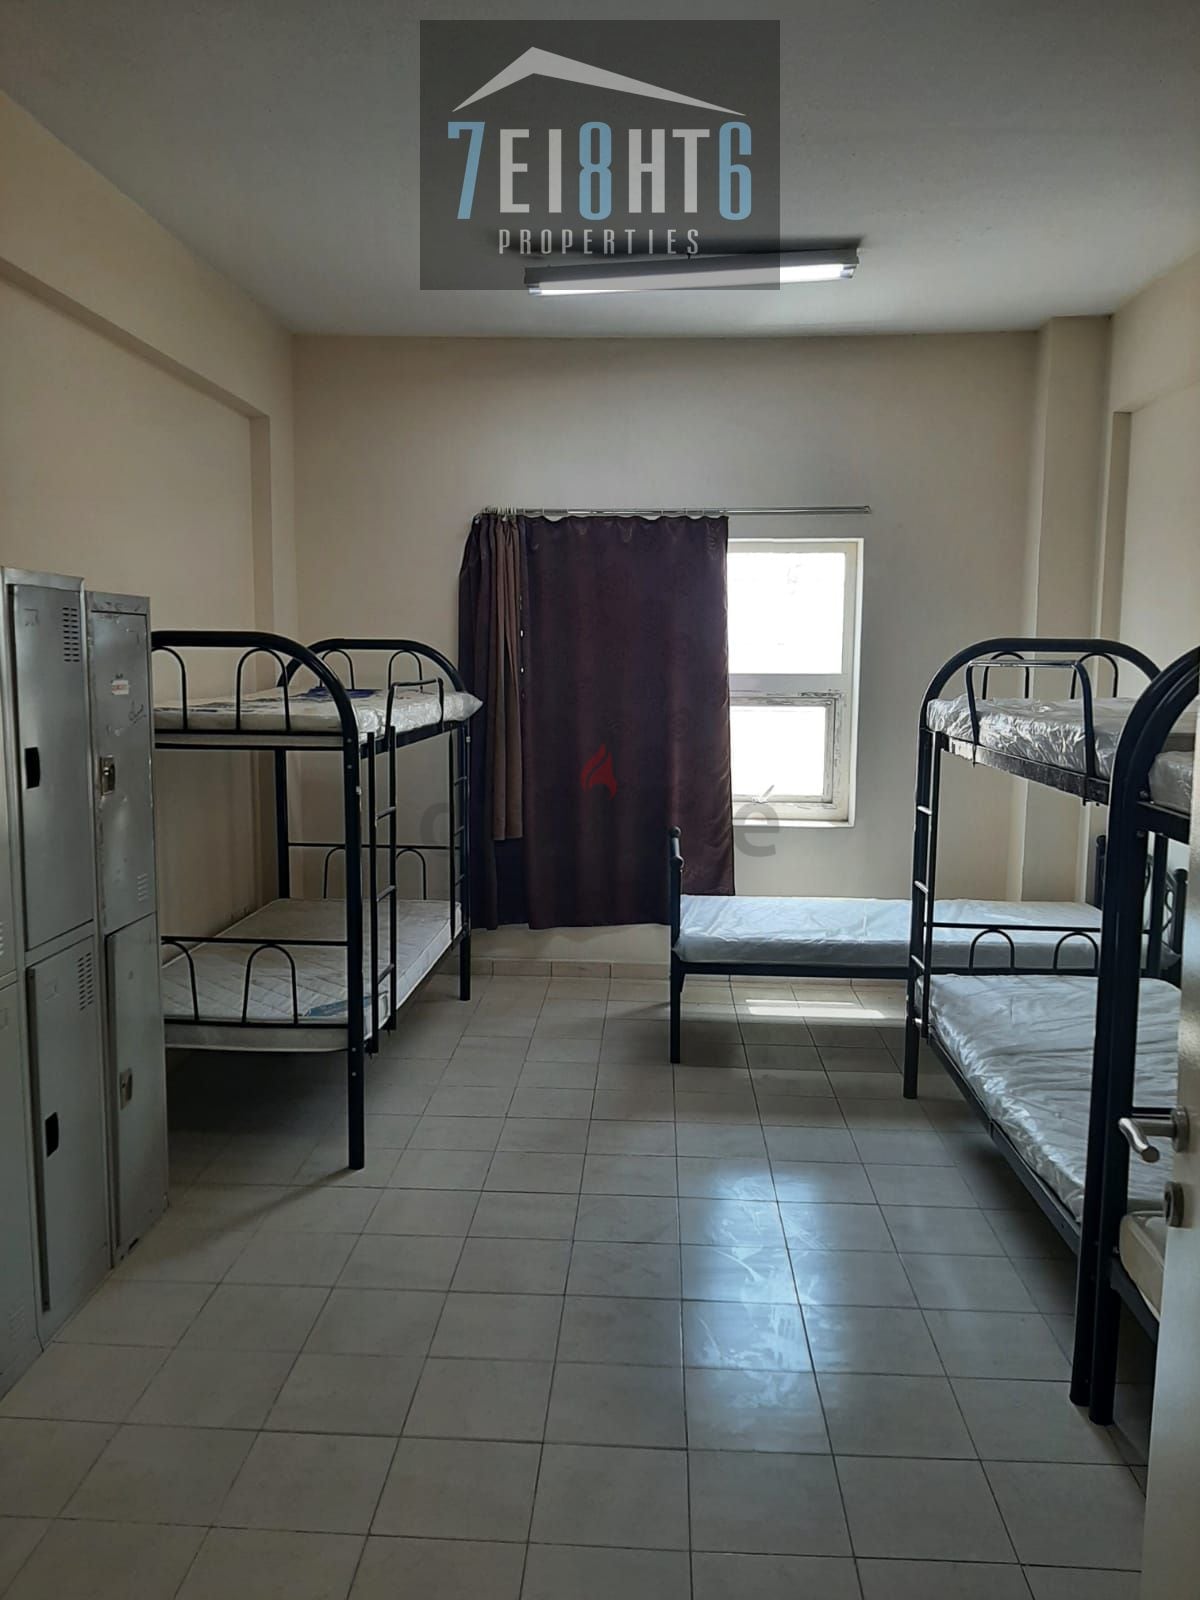 10 Rooms Sharing Or Indep Labour Camp With 6-8 Person Capacity + 117 Washbasins + 117 Bathrooms + 2